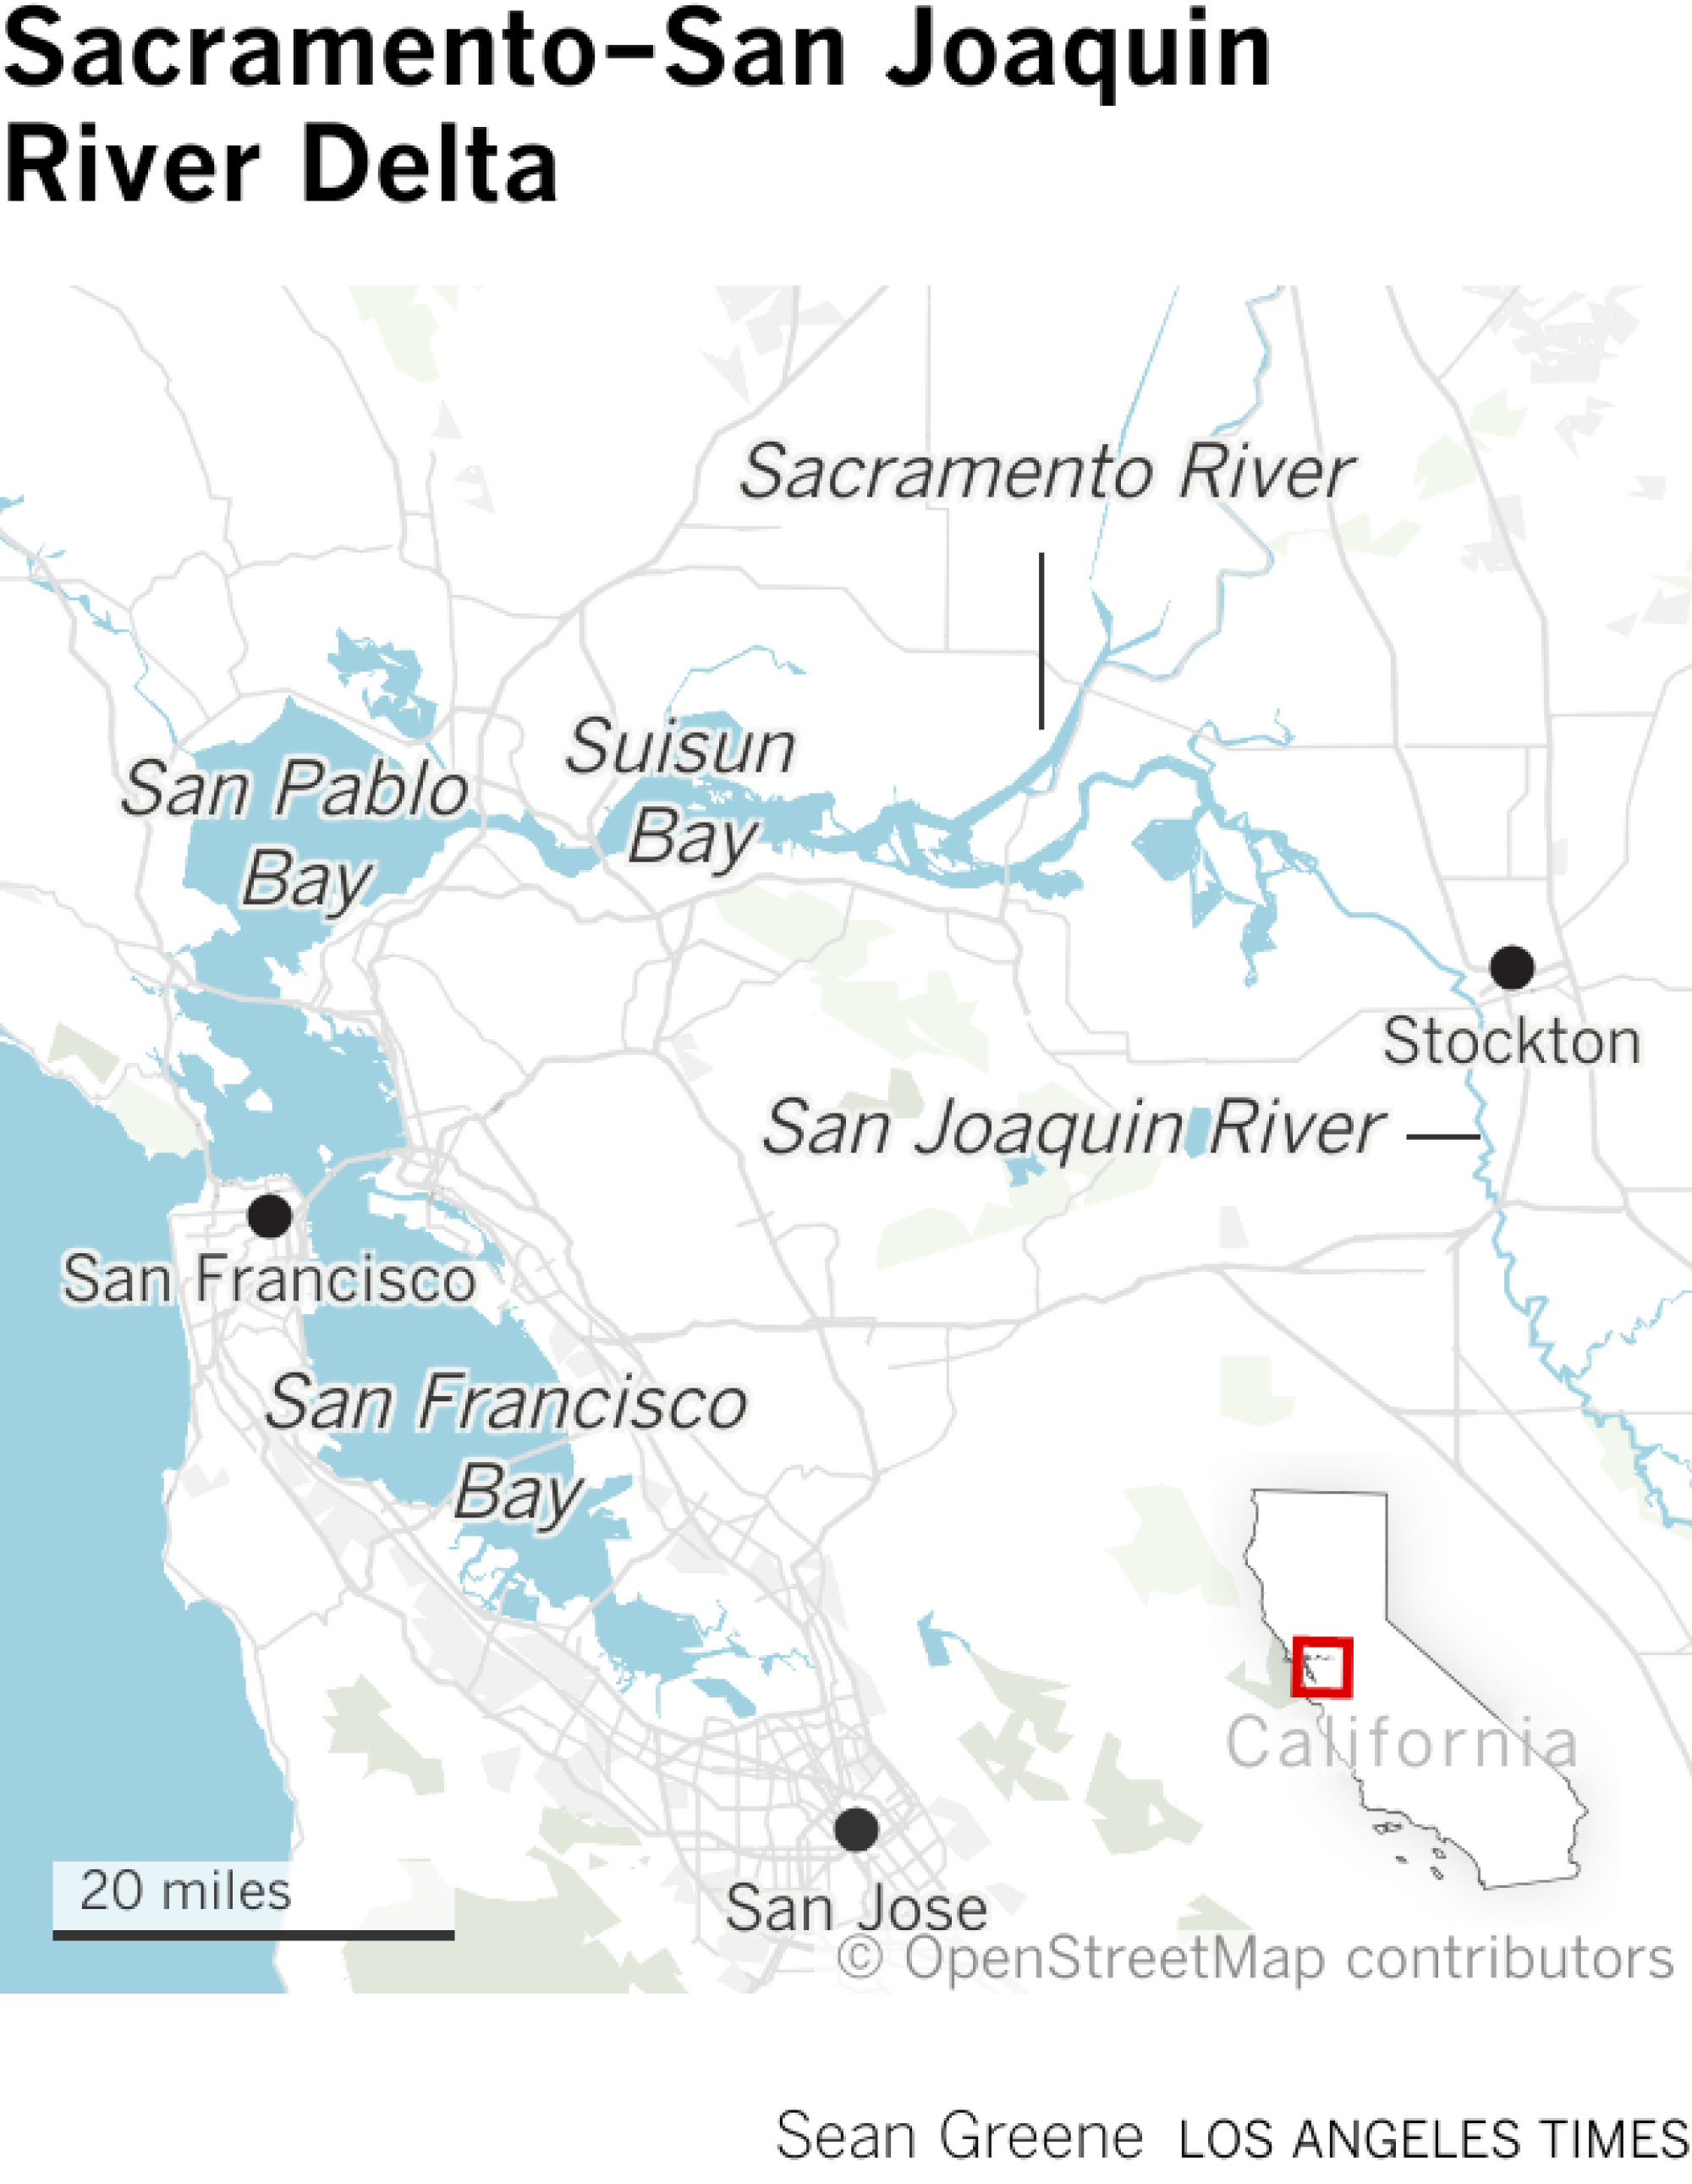 A map showing the Sacramento-San Joaquin River Delta, where the rivers meet a series of bays in the San Francisco area.